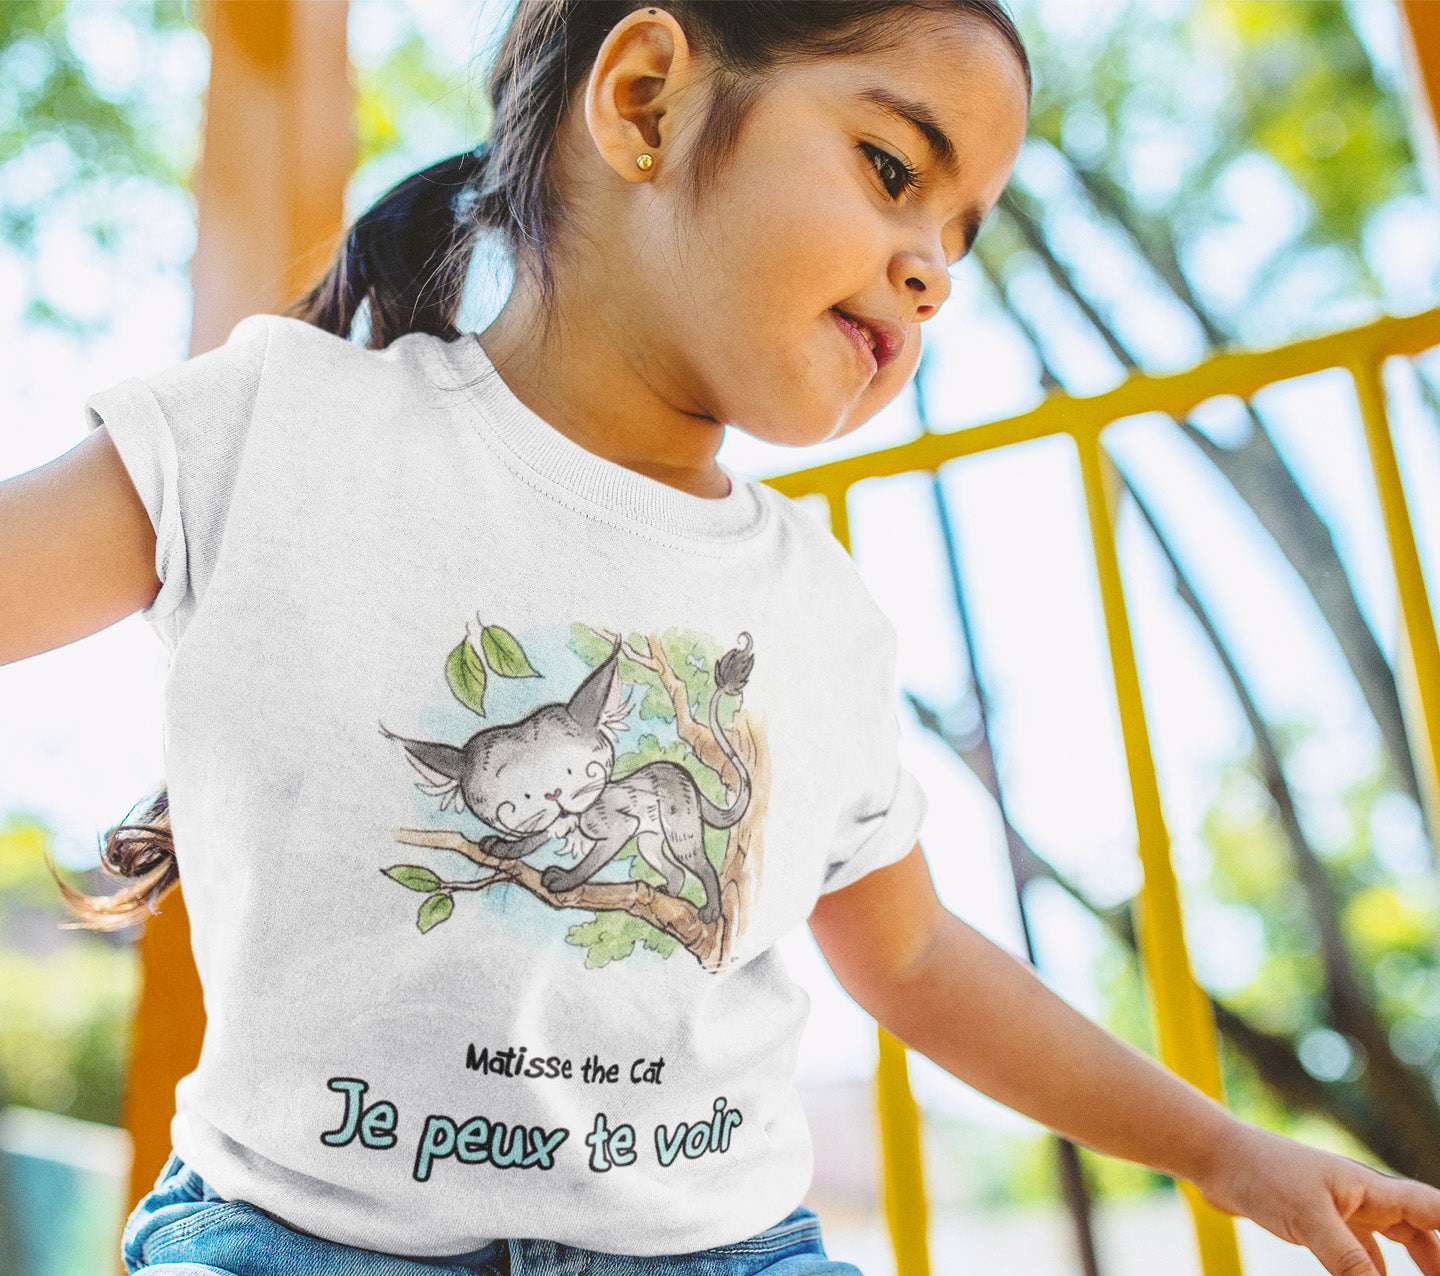 A white official, Matisse the Cat children’s t-shirt with the slogan ‘Je peux te voir’ showcases Matisse sitting in his garden smiling with a sleeping hedgehog curled up beside him resting on his leg. Worn by a little girl playing on a climbing frame.